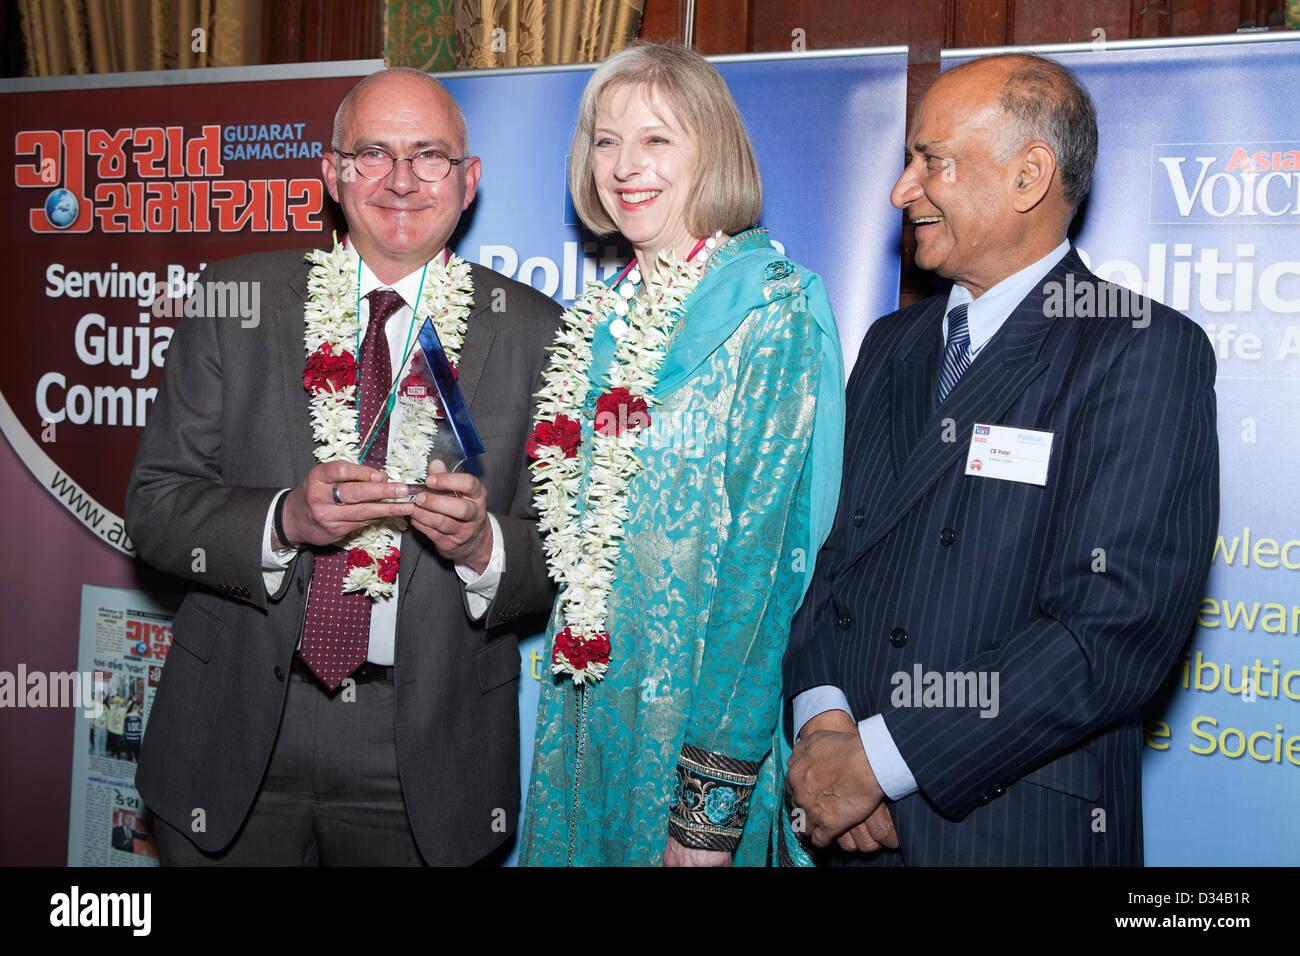 London, UK. 7th February 2013. On the right is Andrew Norfolk with an award in honour of being the Reporter of the Year at the POlitical and Public Life Awards 2013. In the center is the Cabinet Minister Rt Hon Theresa May, Member of Parliament and on the right is C B Patel, Managing Director, Asian Voice newspaper. Stock Photo